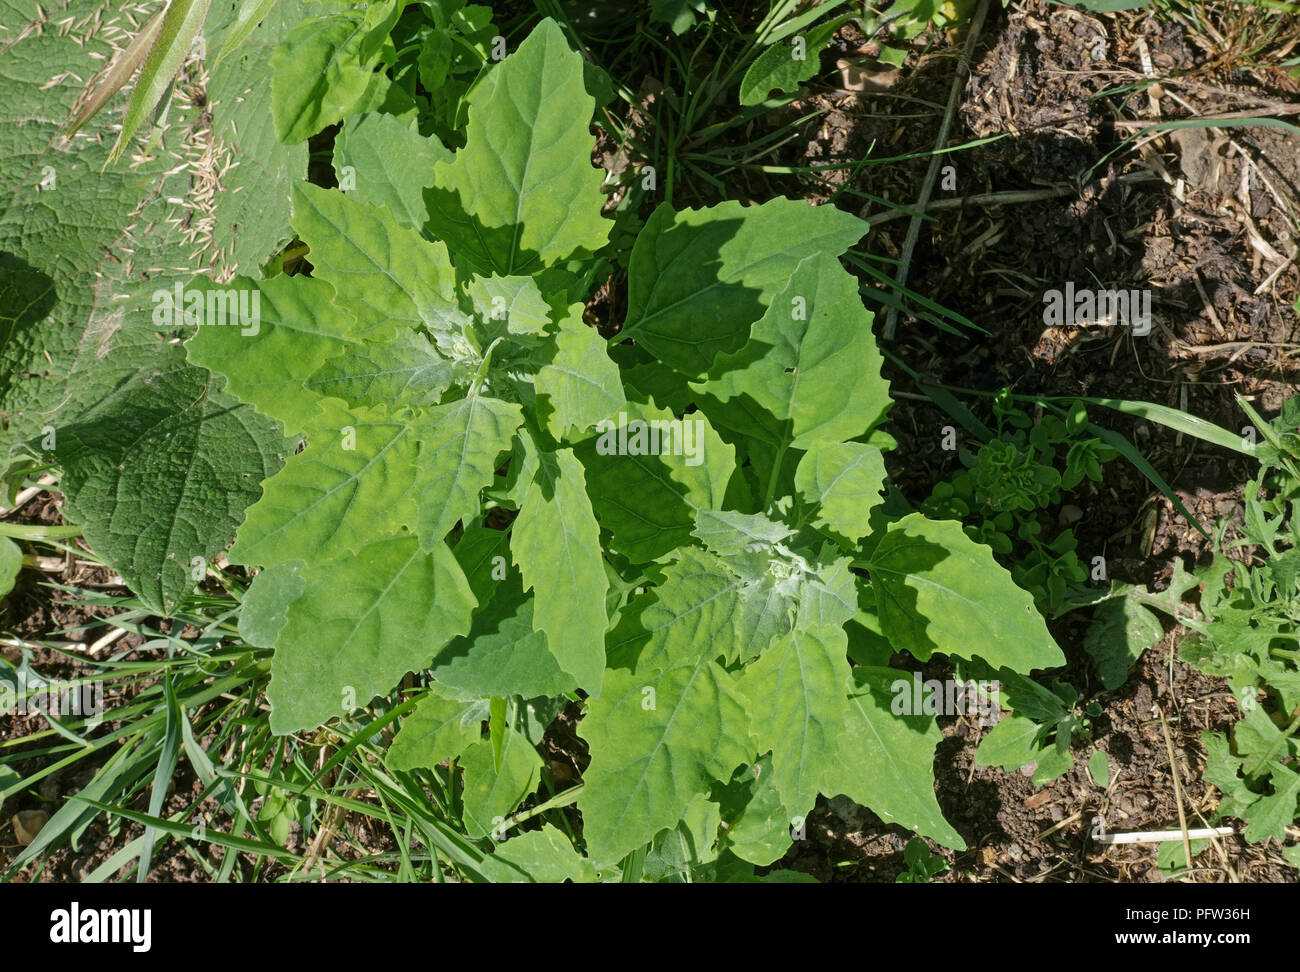 Fat hen or pigweed, Chenopodium album,young plants with young glaucous leaves, Berkshire, June Stock Photo